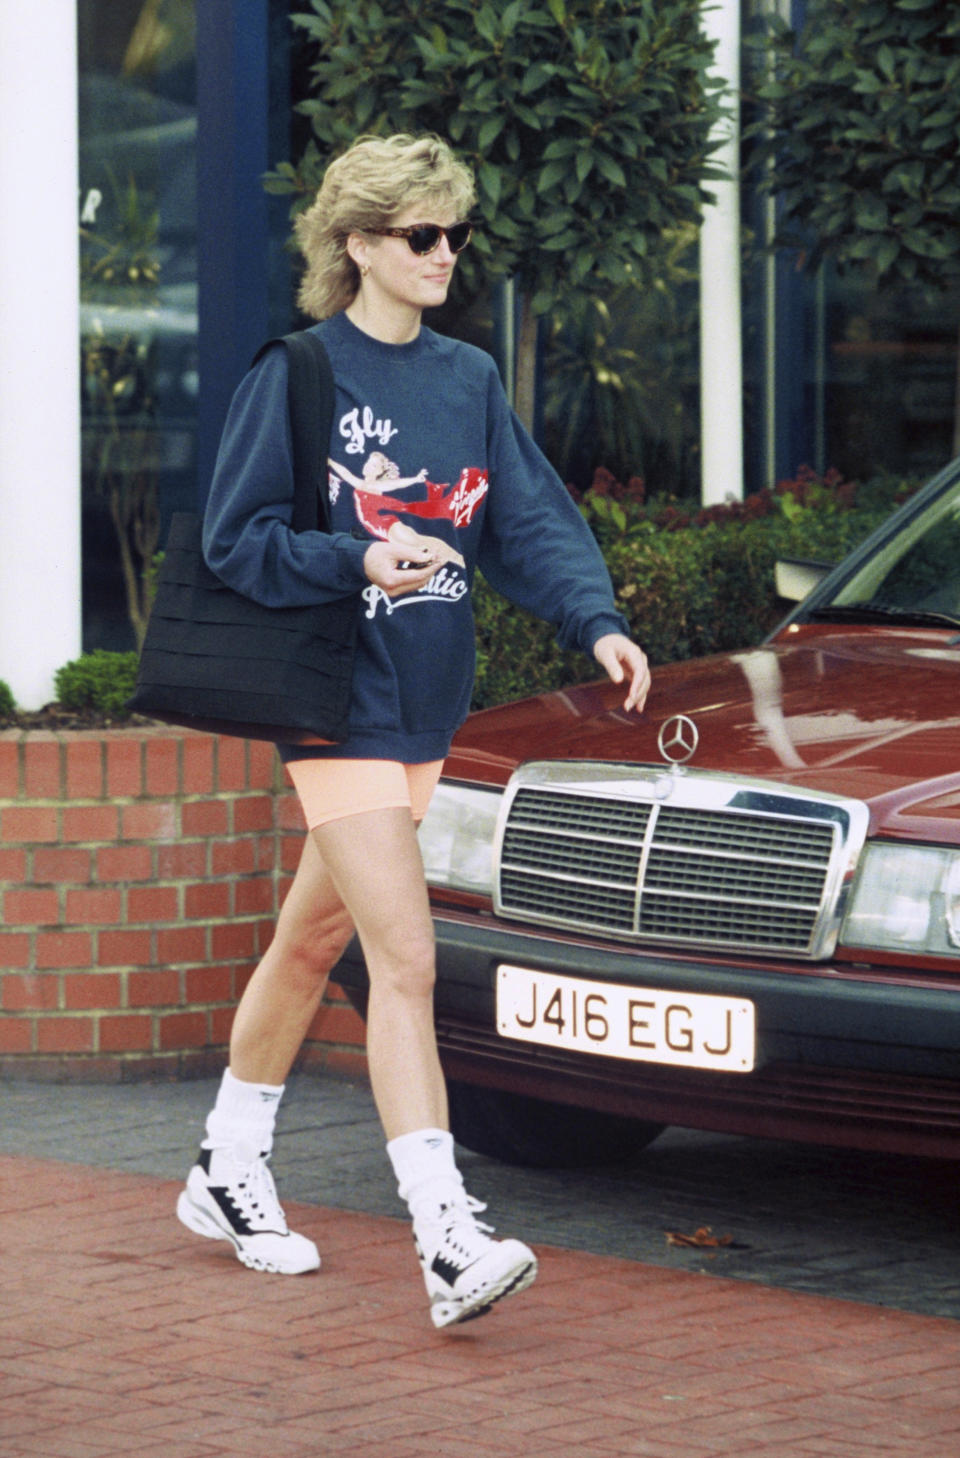 Princess Diana’s cycle short trend appears to be making a comeback. Source: Getty